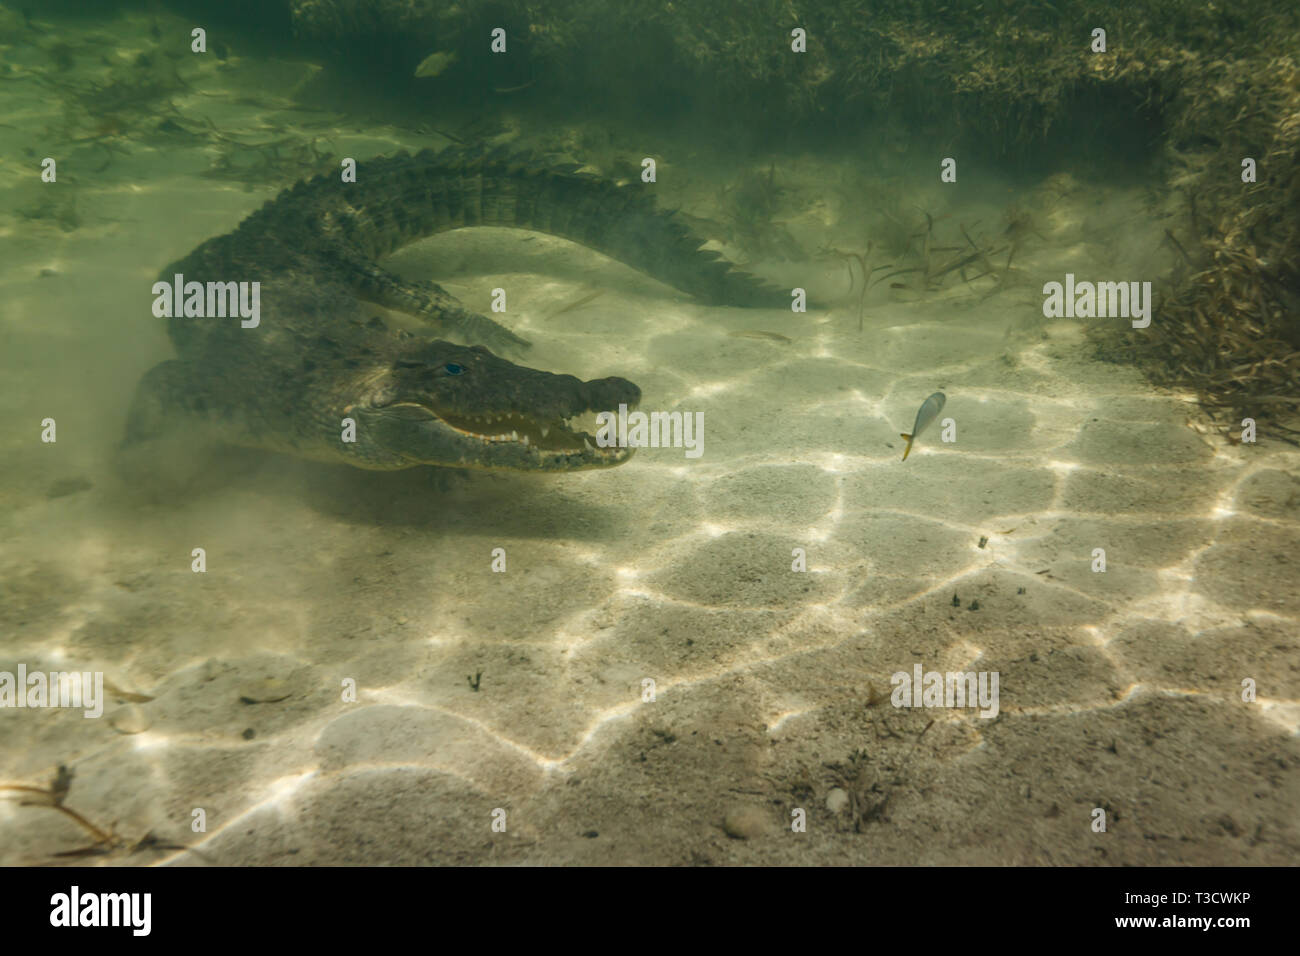 Closeup of an American crocodile, Crocodylus acutus, jaw open, swimming out of patch of sea grass on the ocean floor to grab a fish Stock Photo